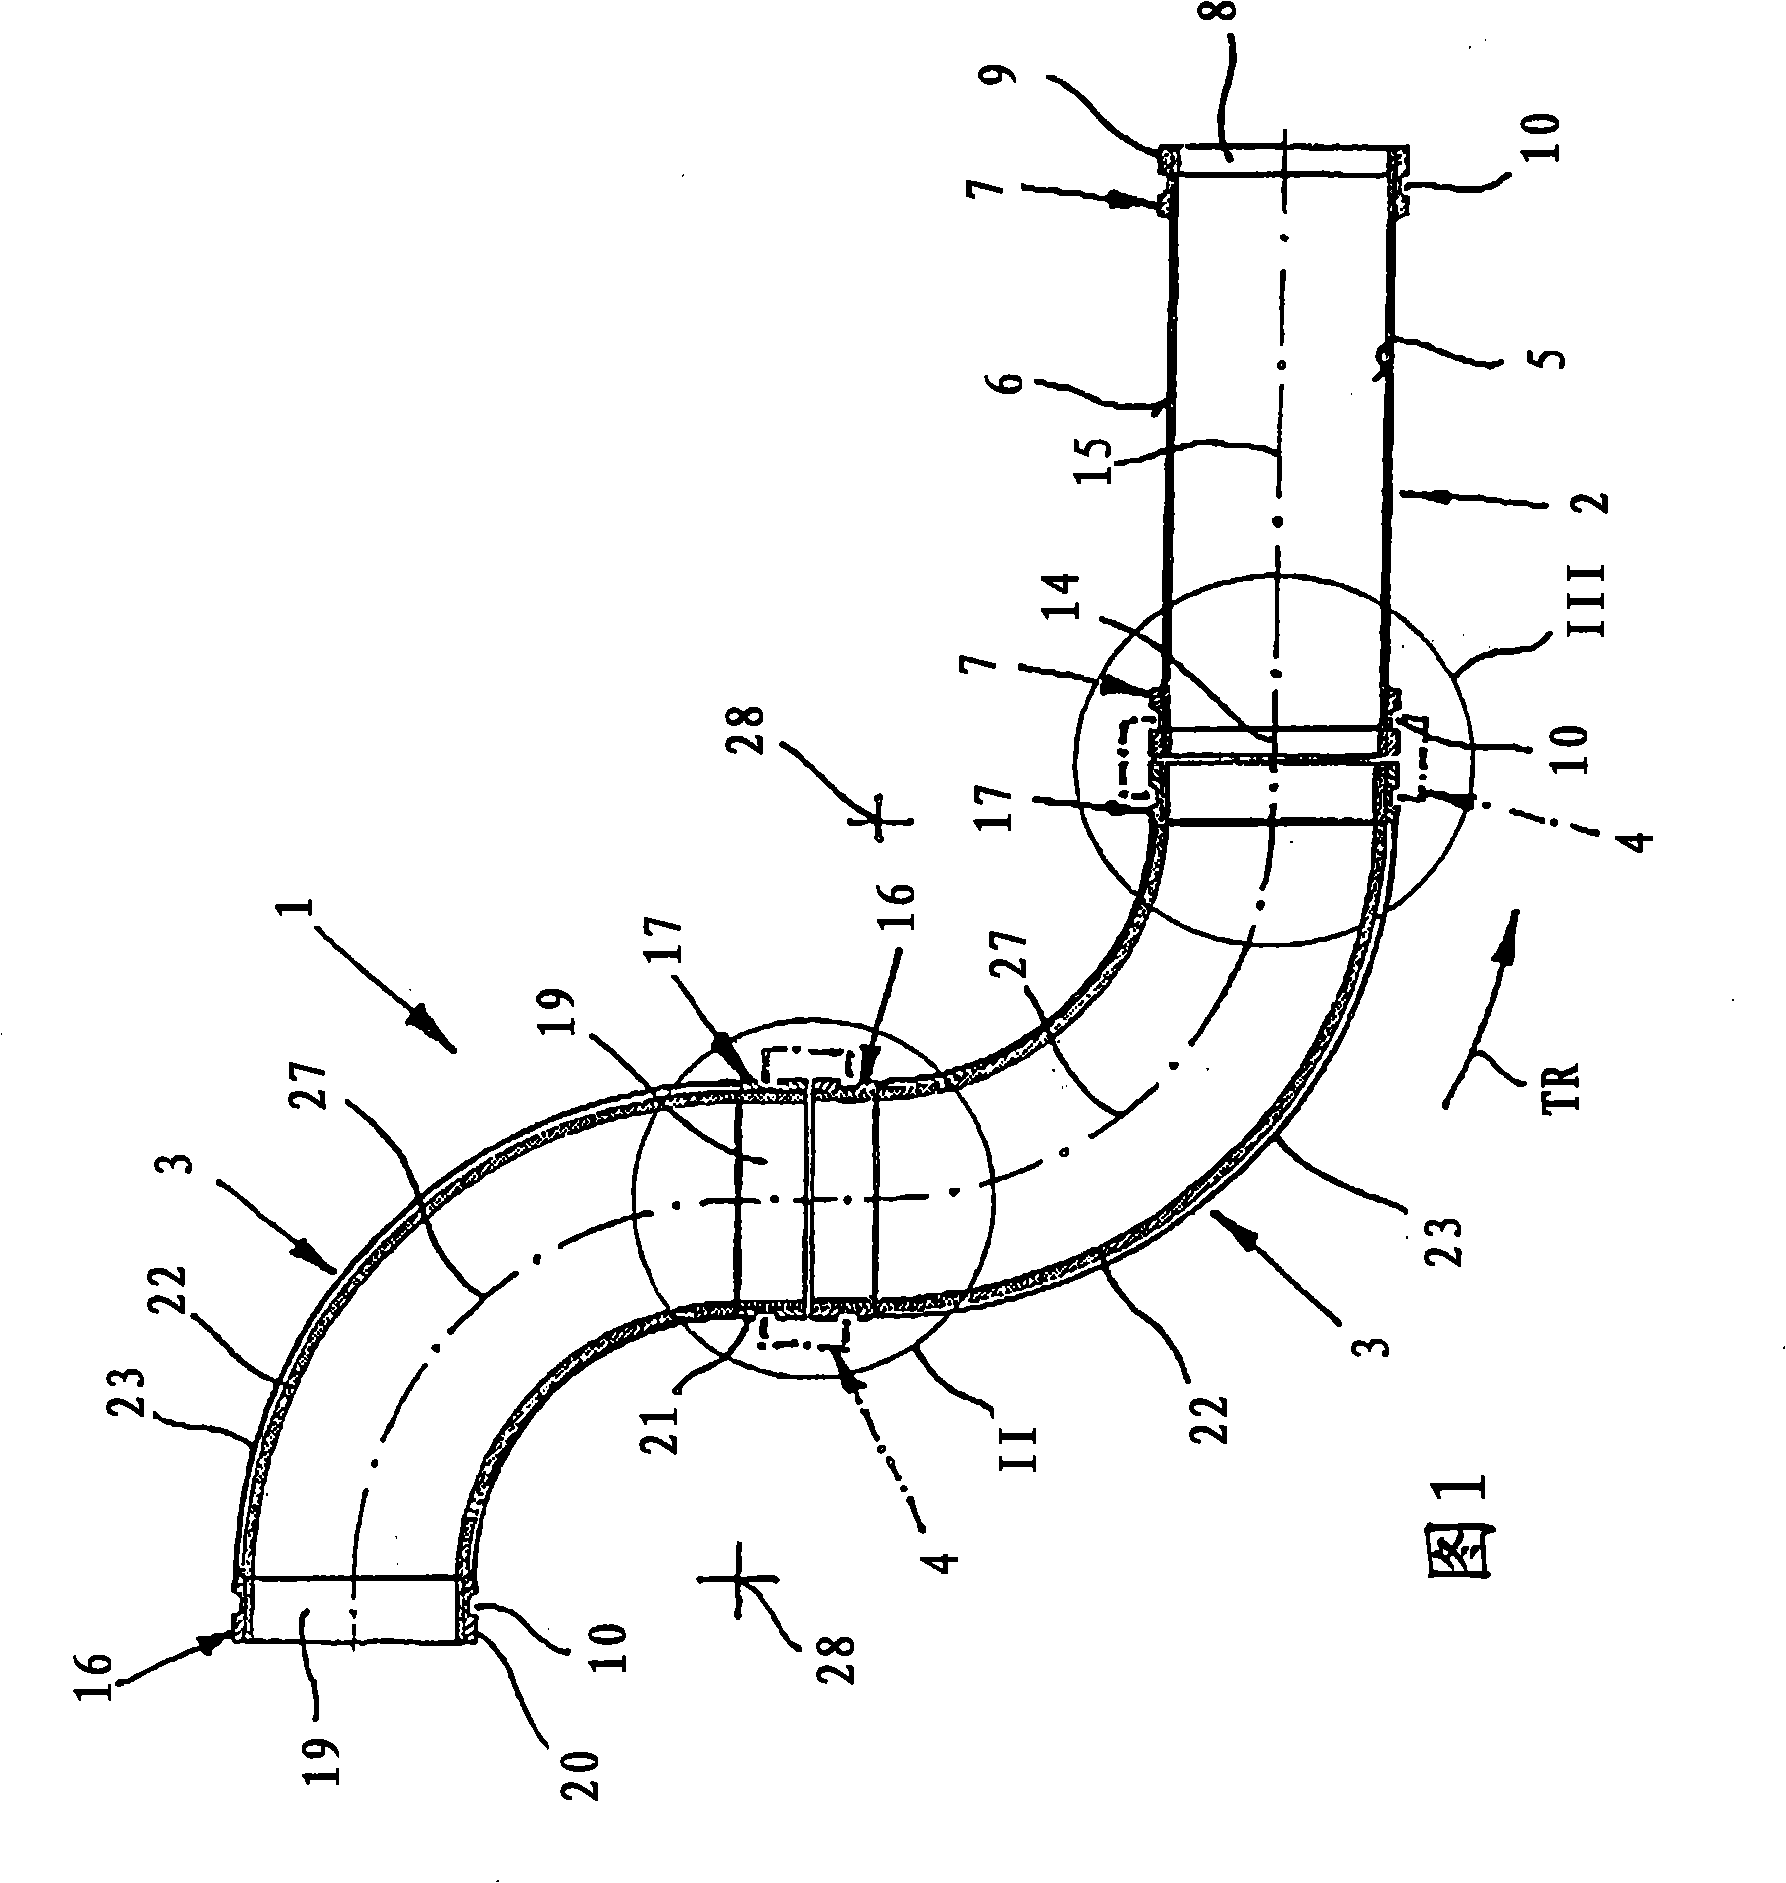 Pipeline for the hydraulic or pneumatic transport of solids